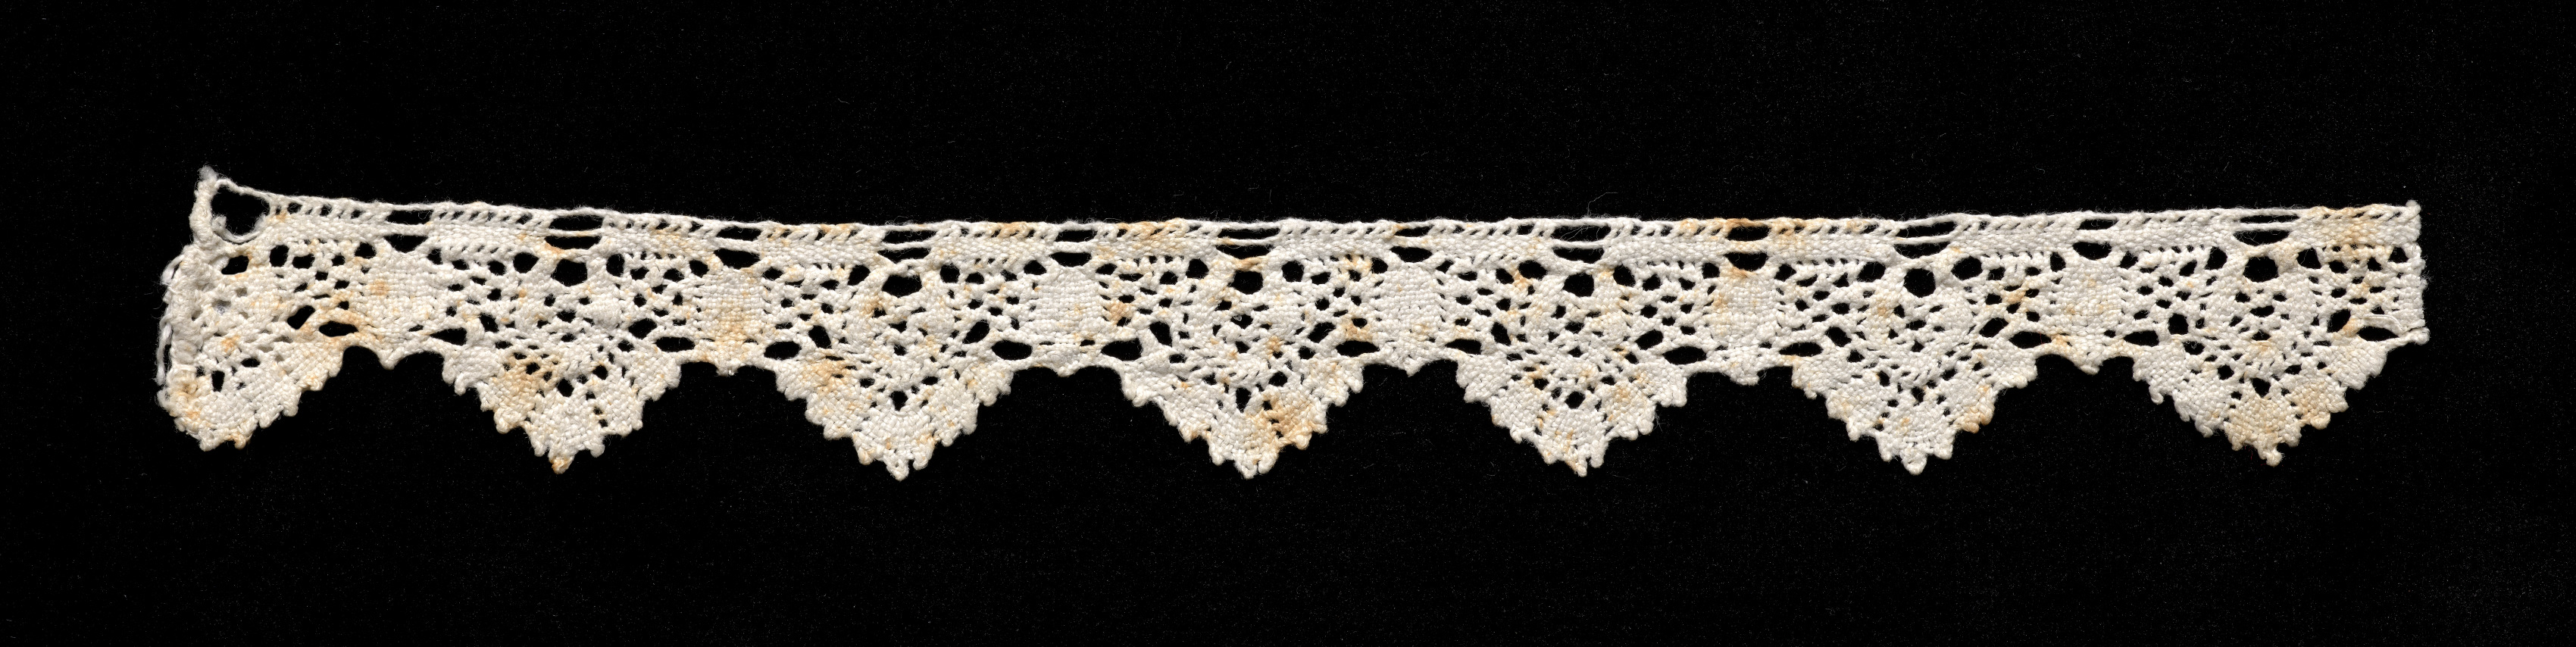 Bobbin Lace Edging of Bell Points